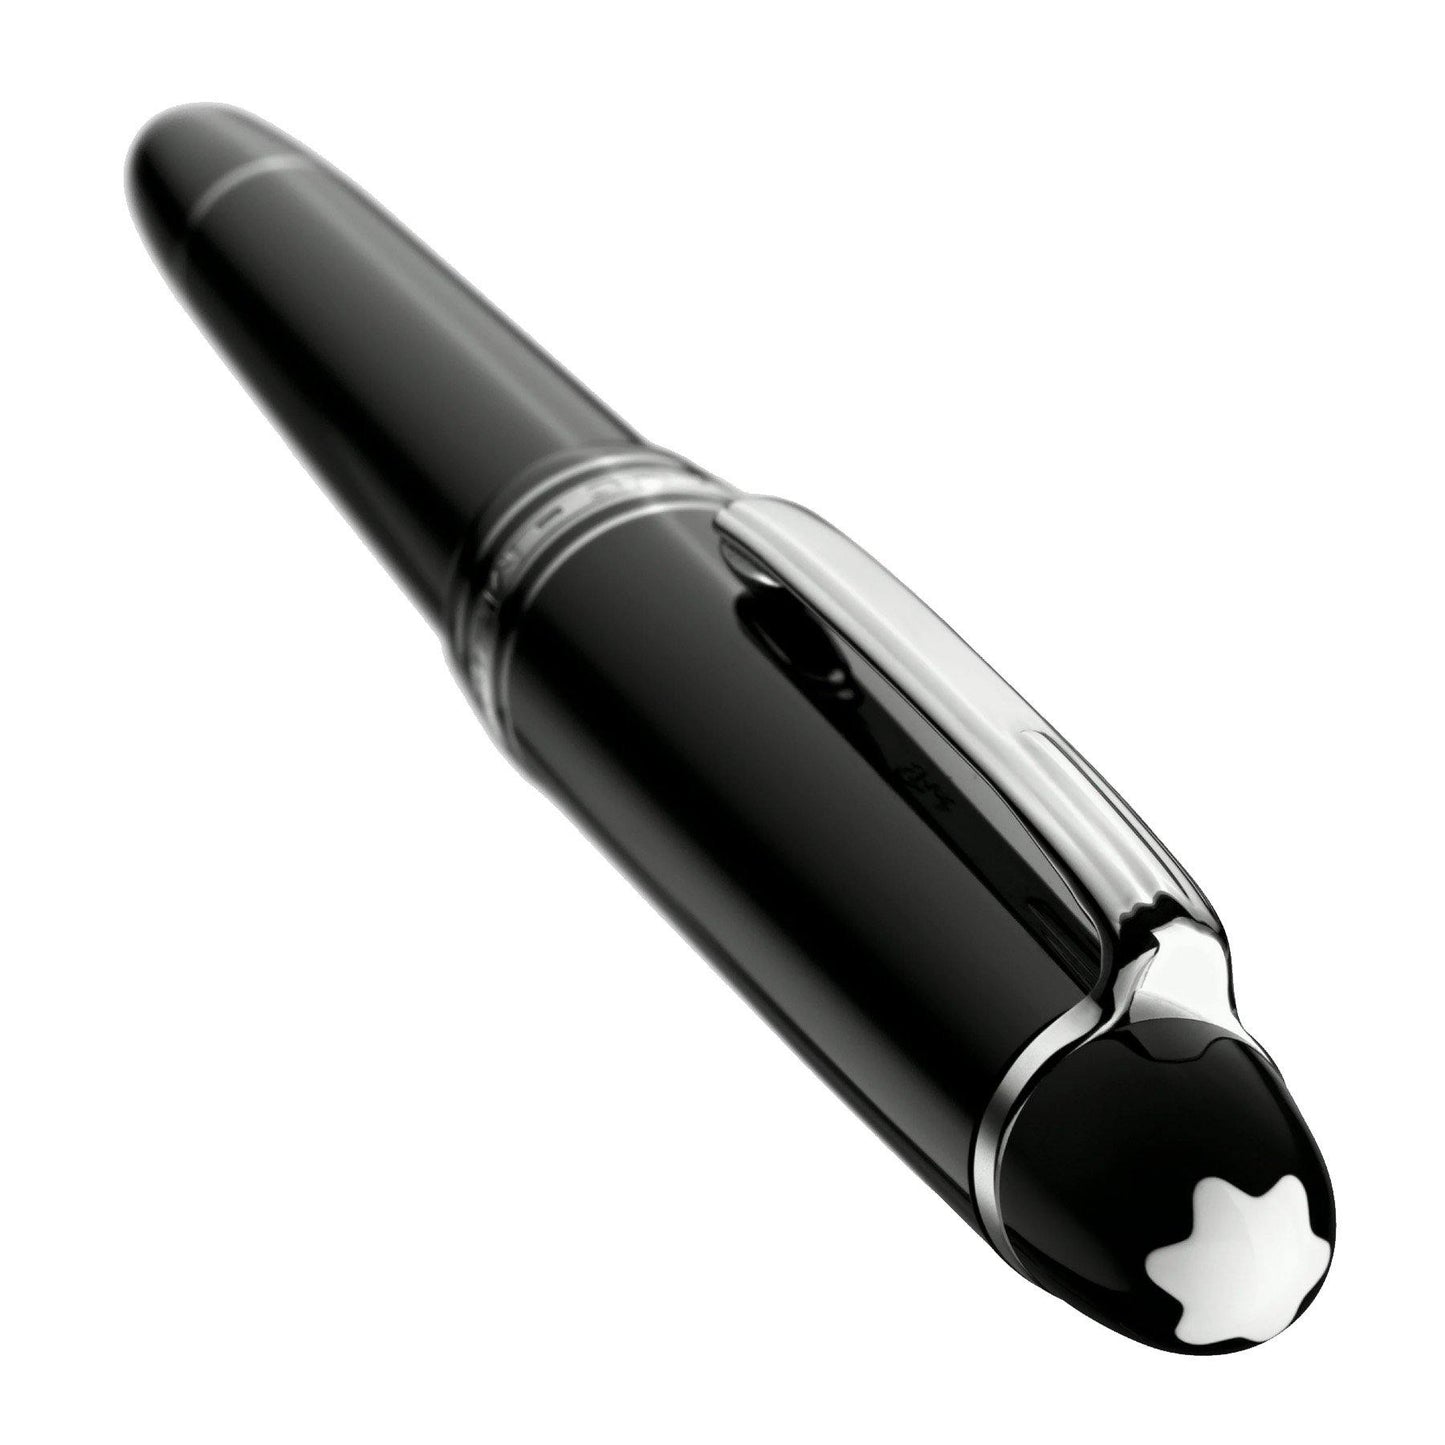 Meisterstuck Platinum-Coated LeGrand Rollerball - Cosmos Boutique New Jersey